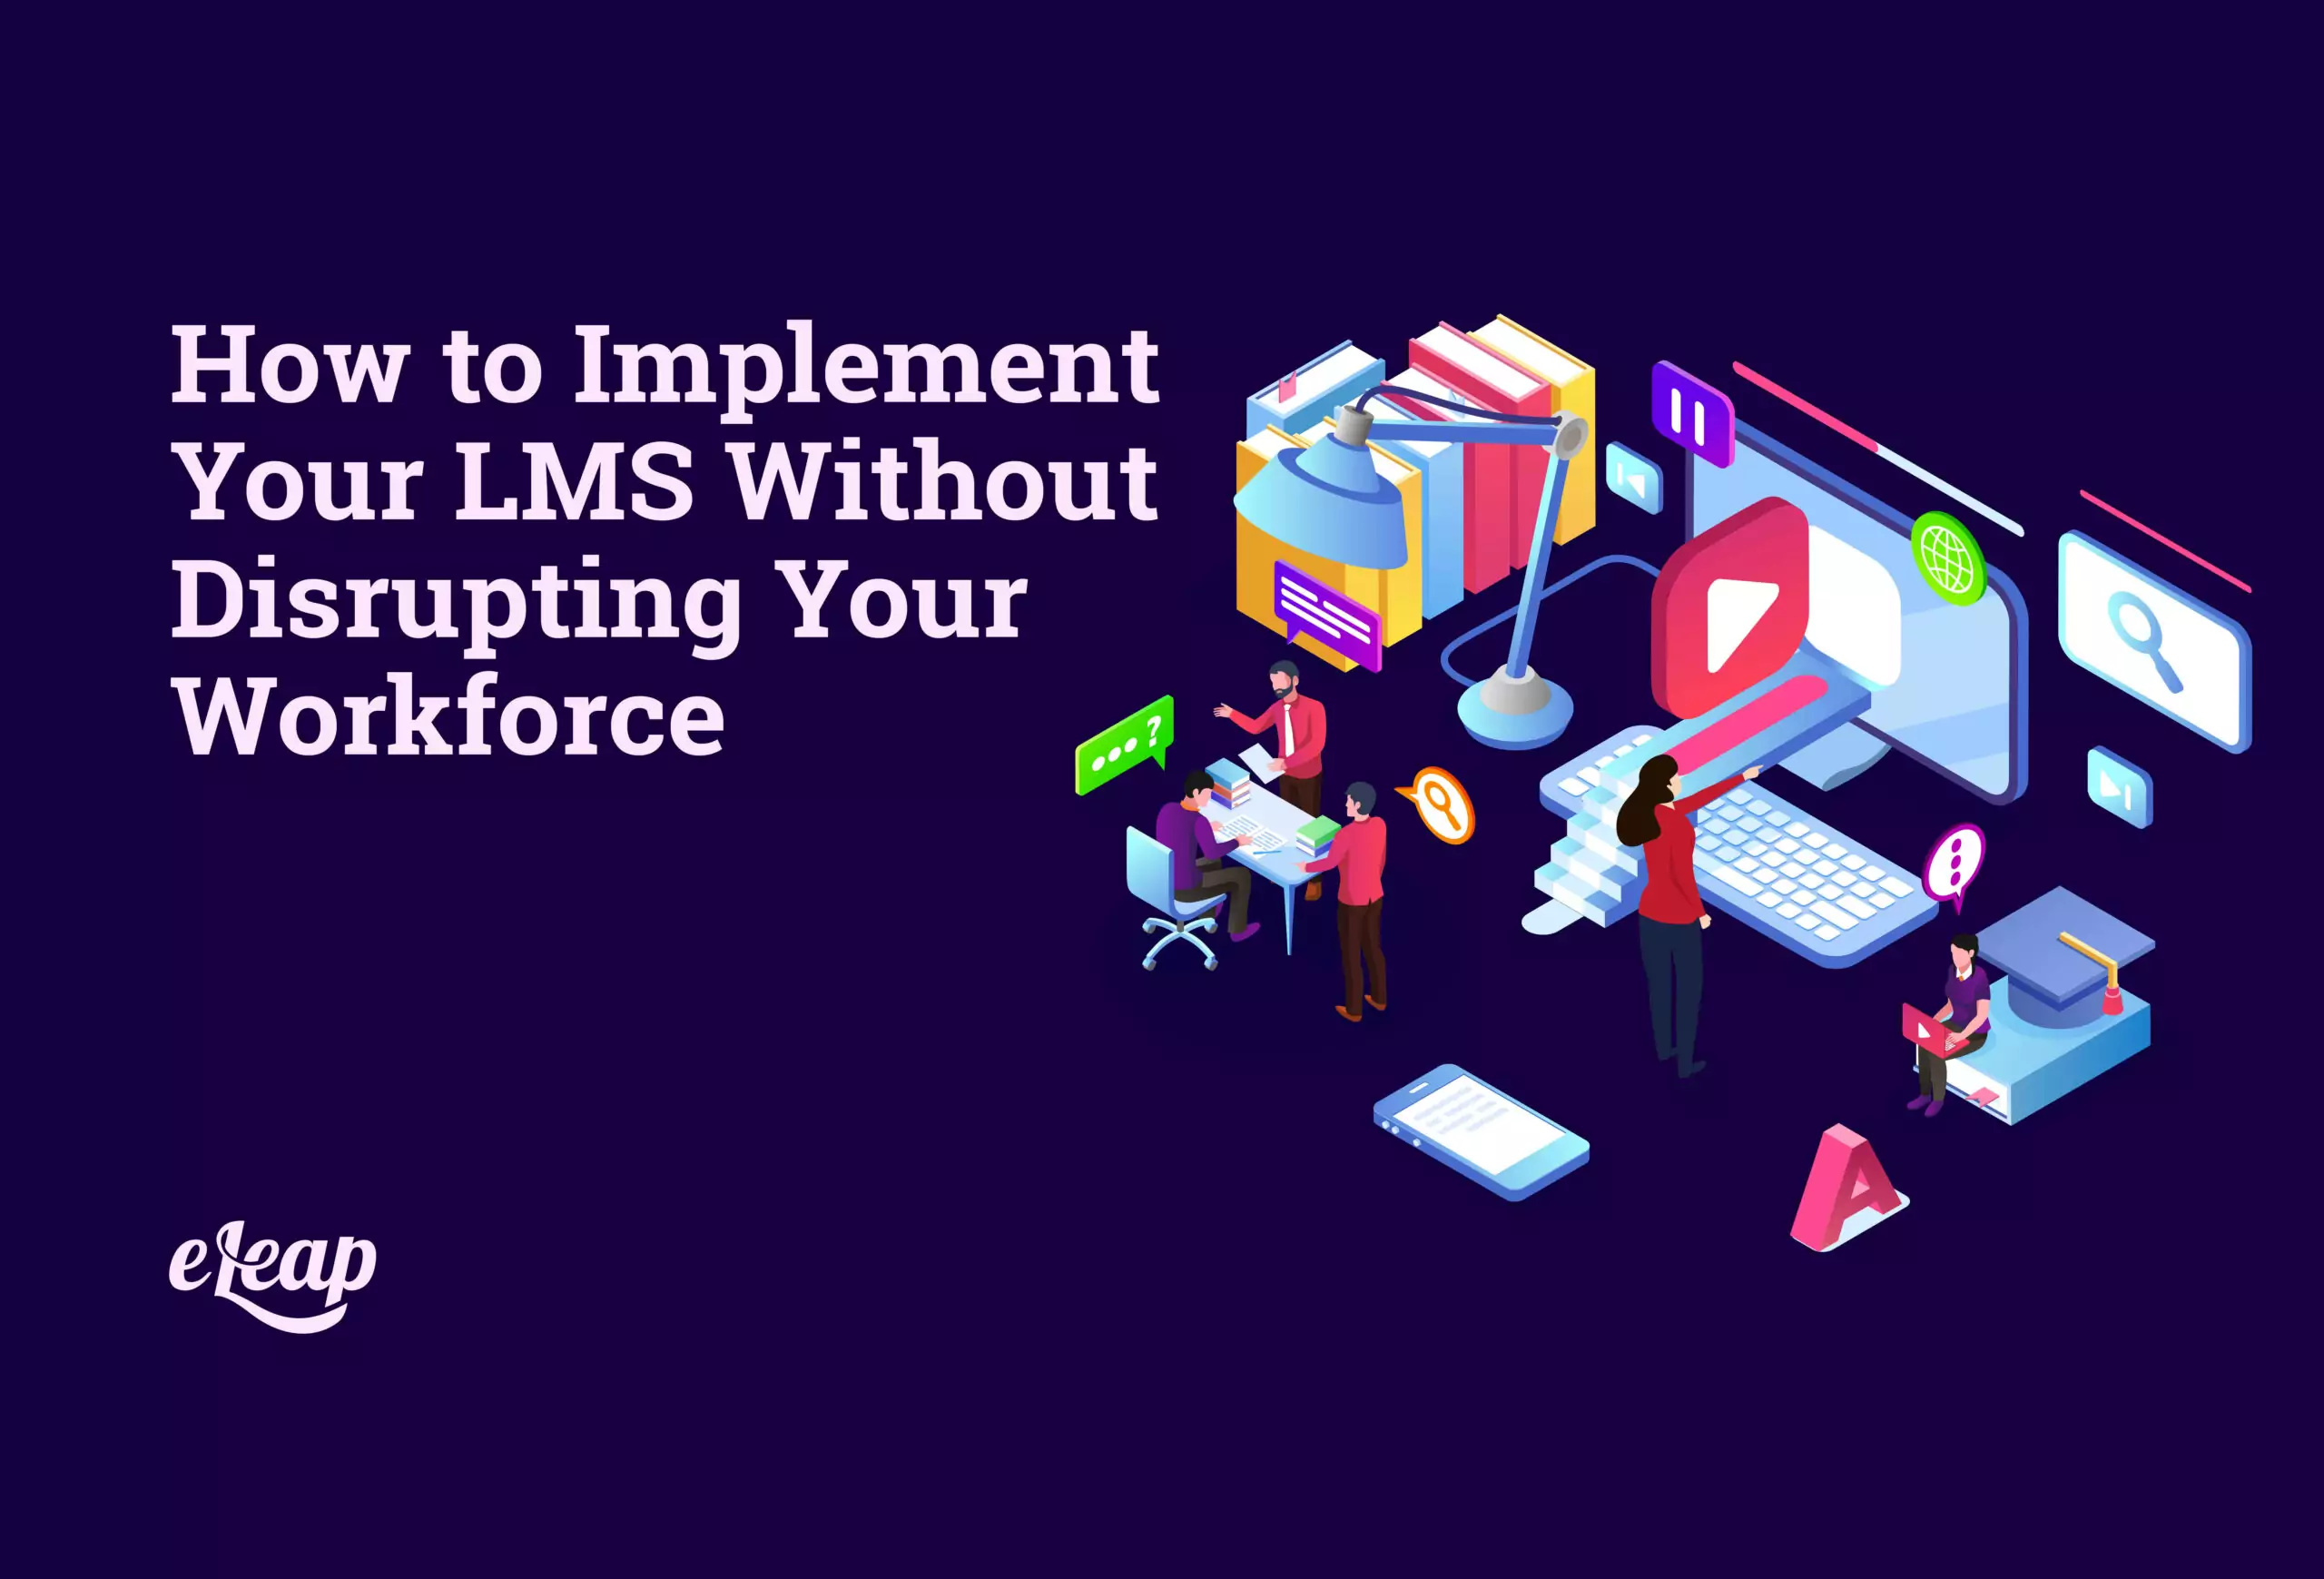 How to Implement Your LMS Without Disrupting Your Workforce